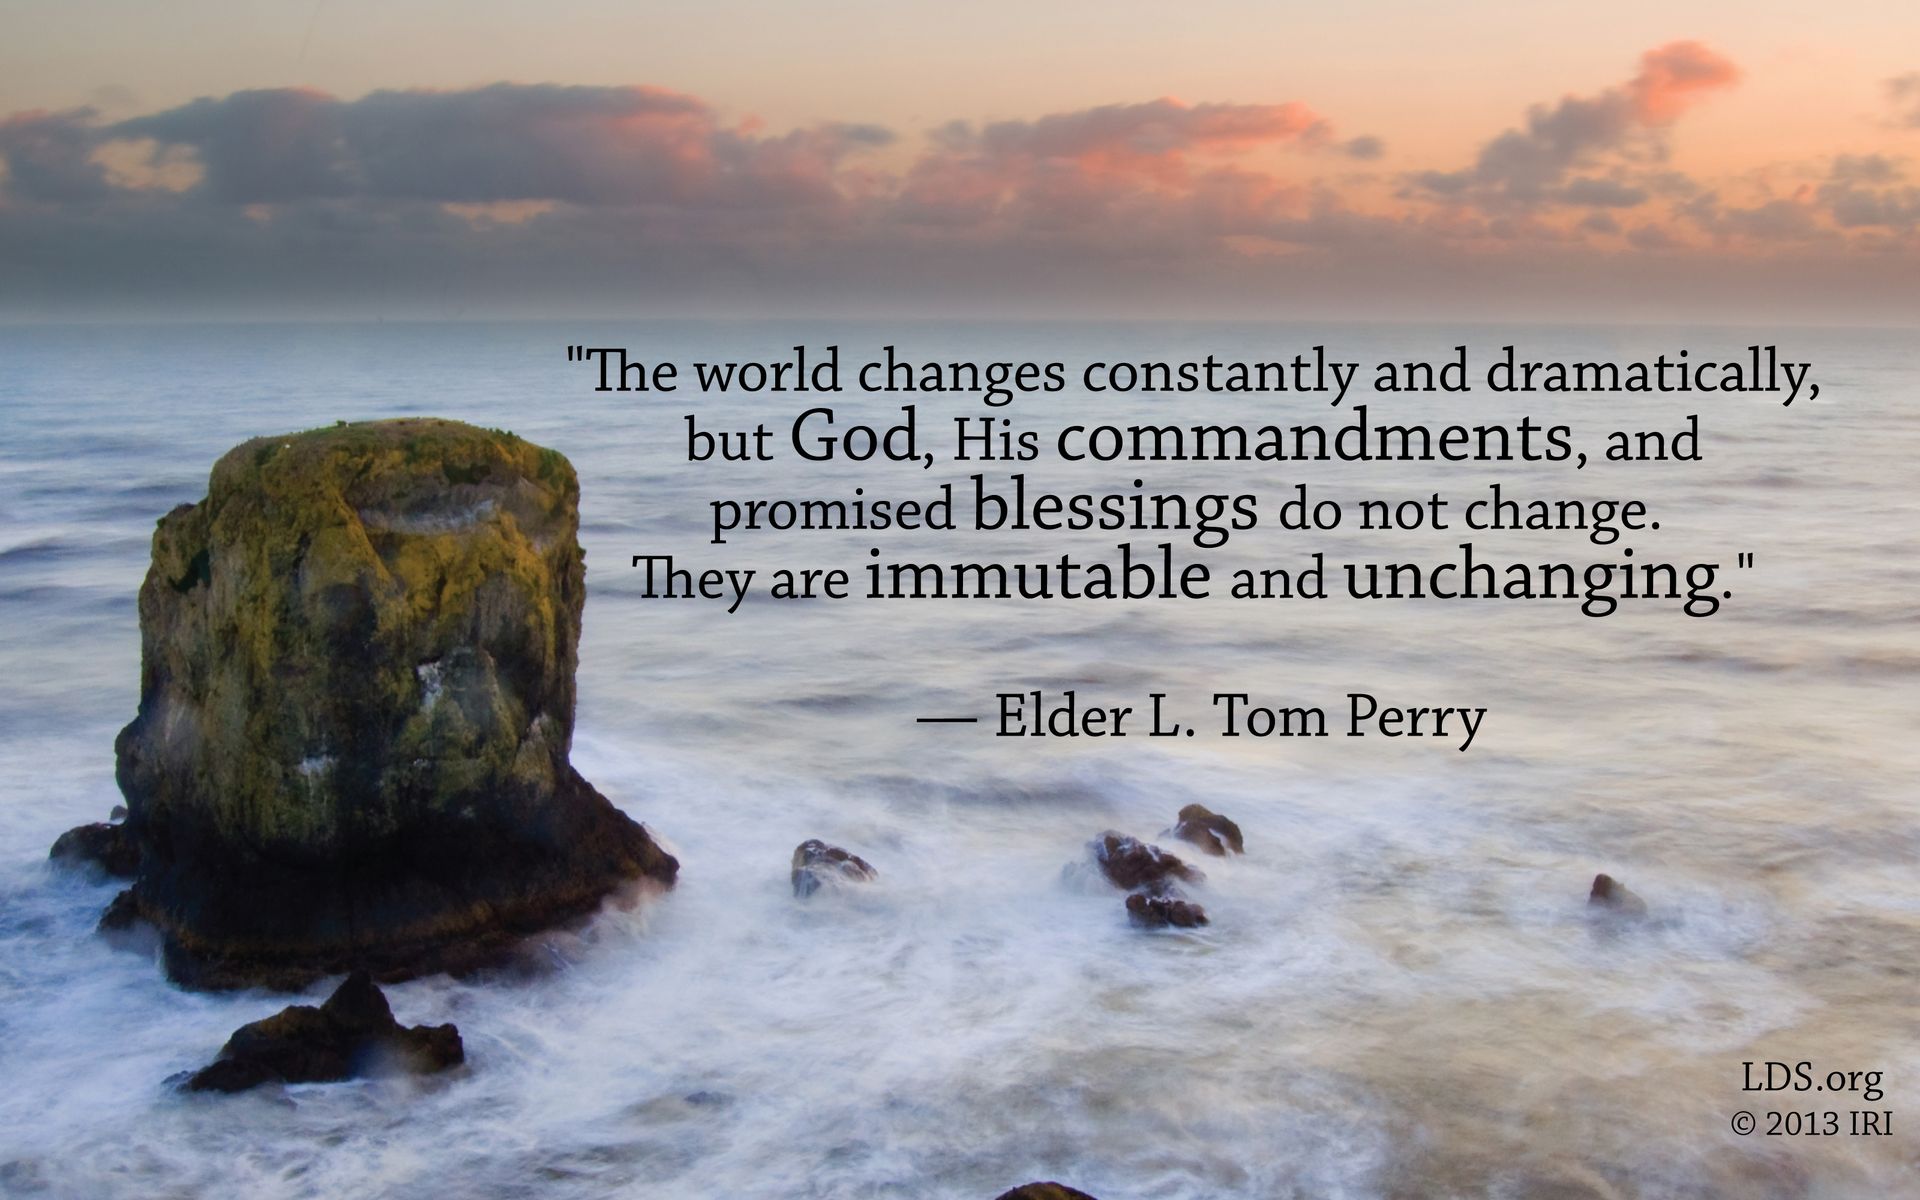 “The world changes constantly and dramatically, but God, His commandments, and promised blessings do not change. They are immutable and unchanging.”—Elder L. Tom Perry, “Obedience to Law Is Liberty” © undefined ipCode 1.